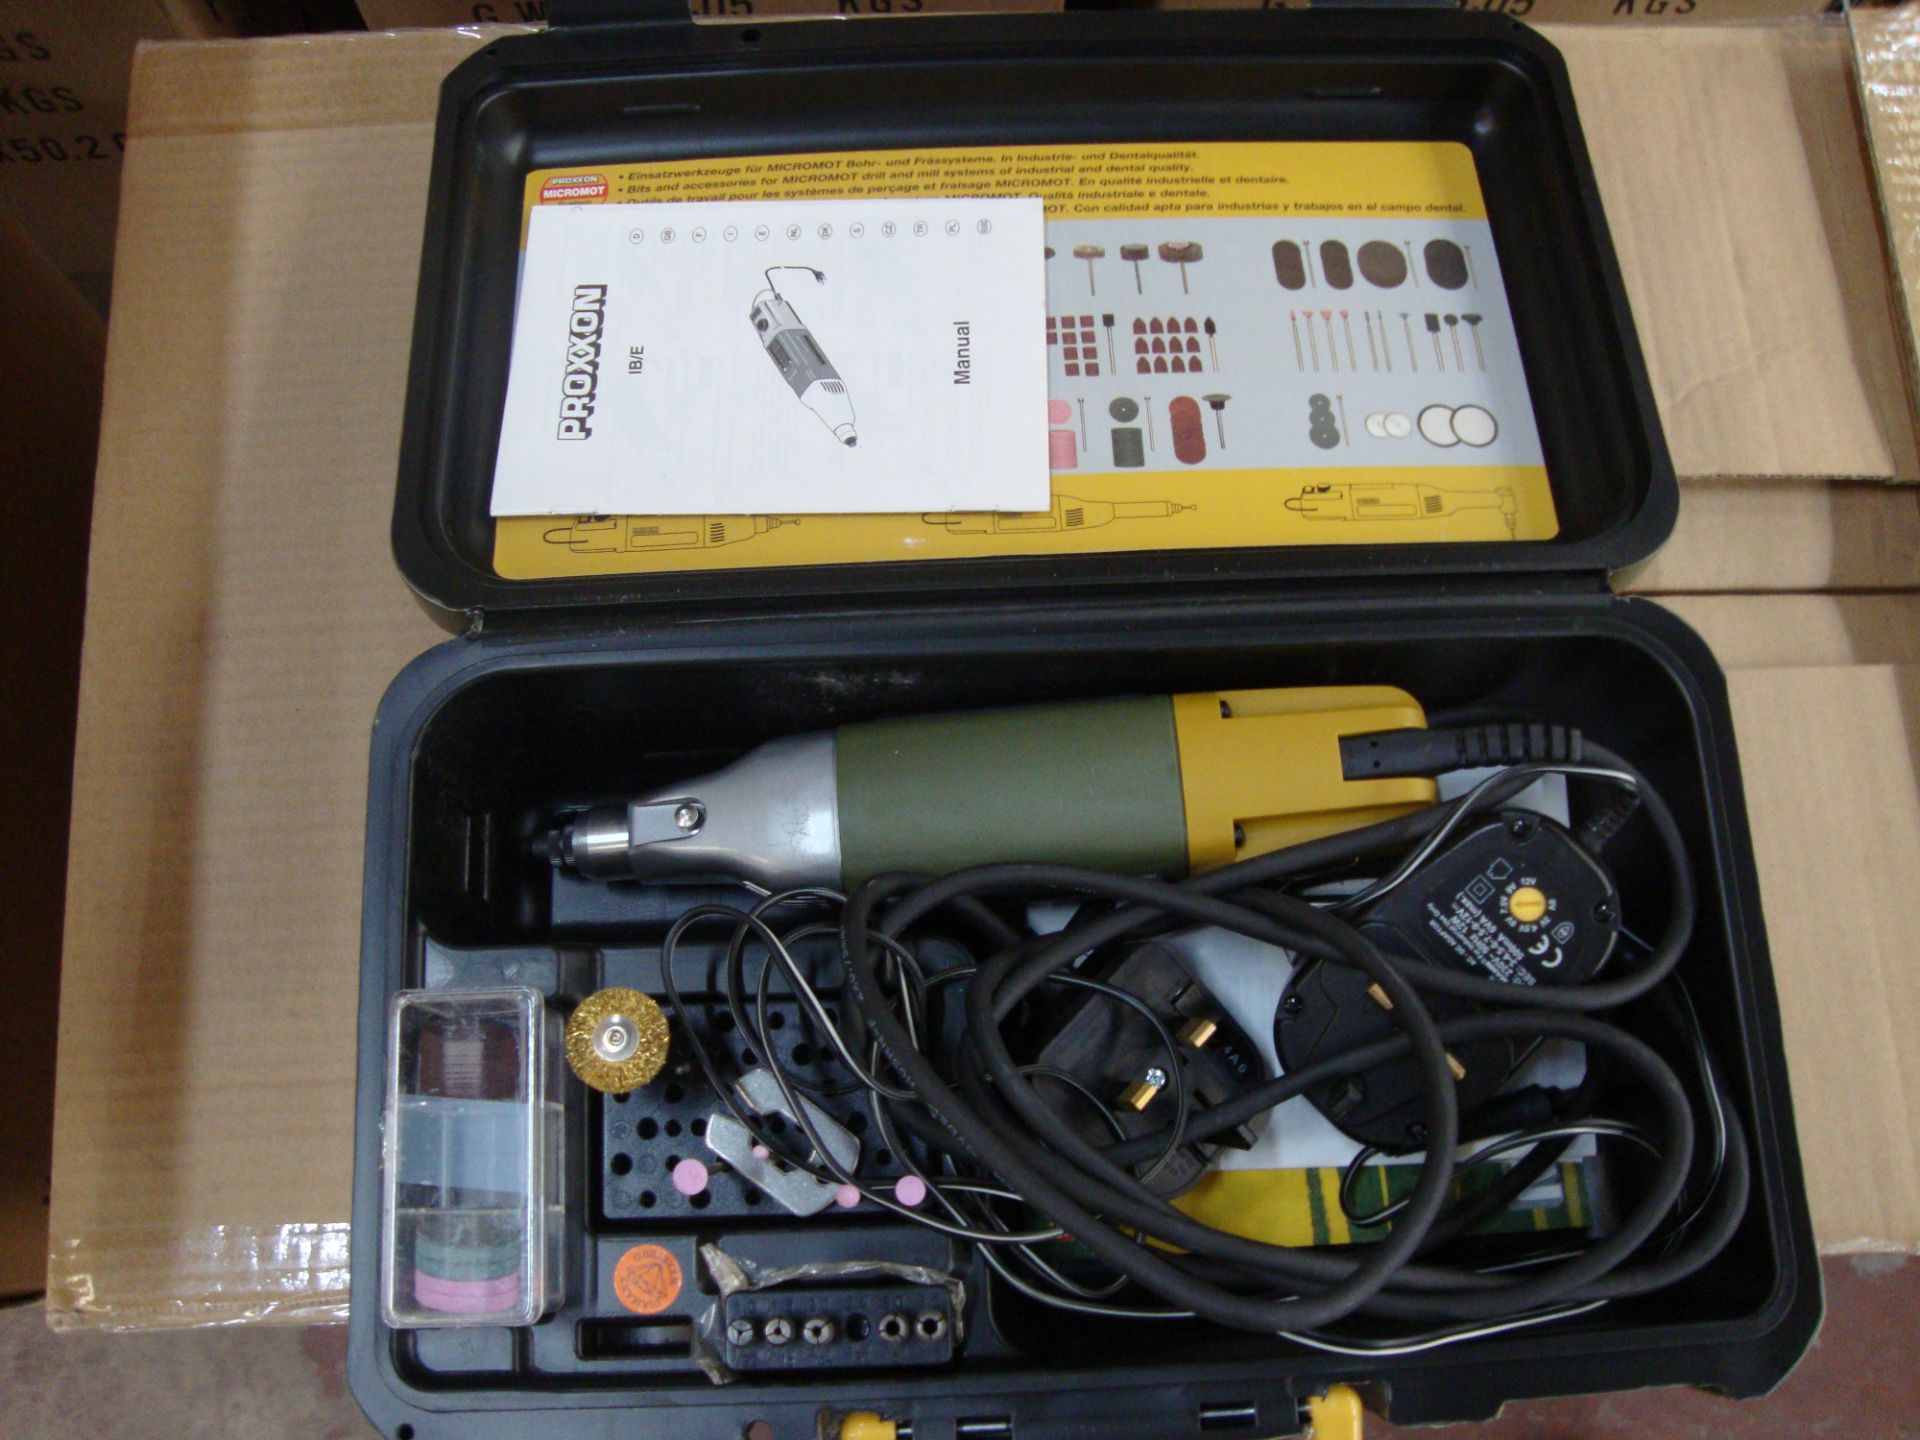 Proxxon micromot drill and mill system multi-tool All the lots in this auction are being sold on